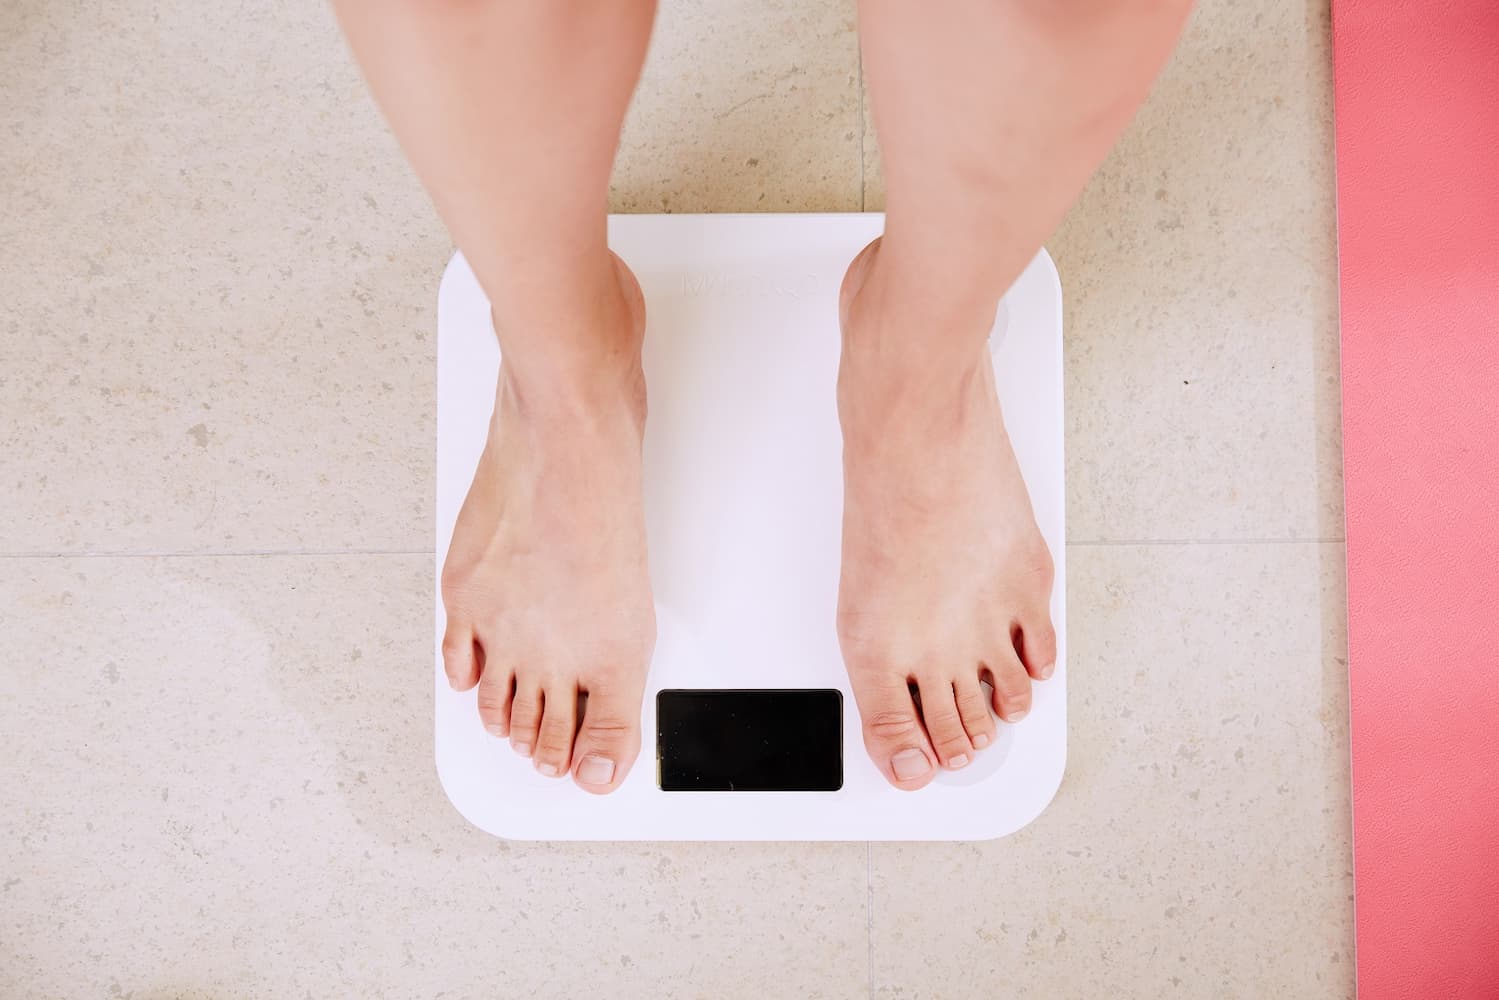 Is weight gain bad for me?